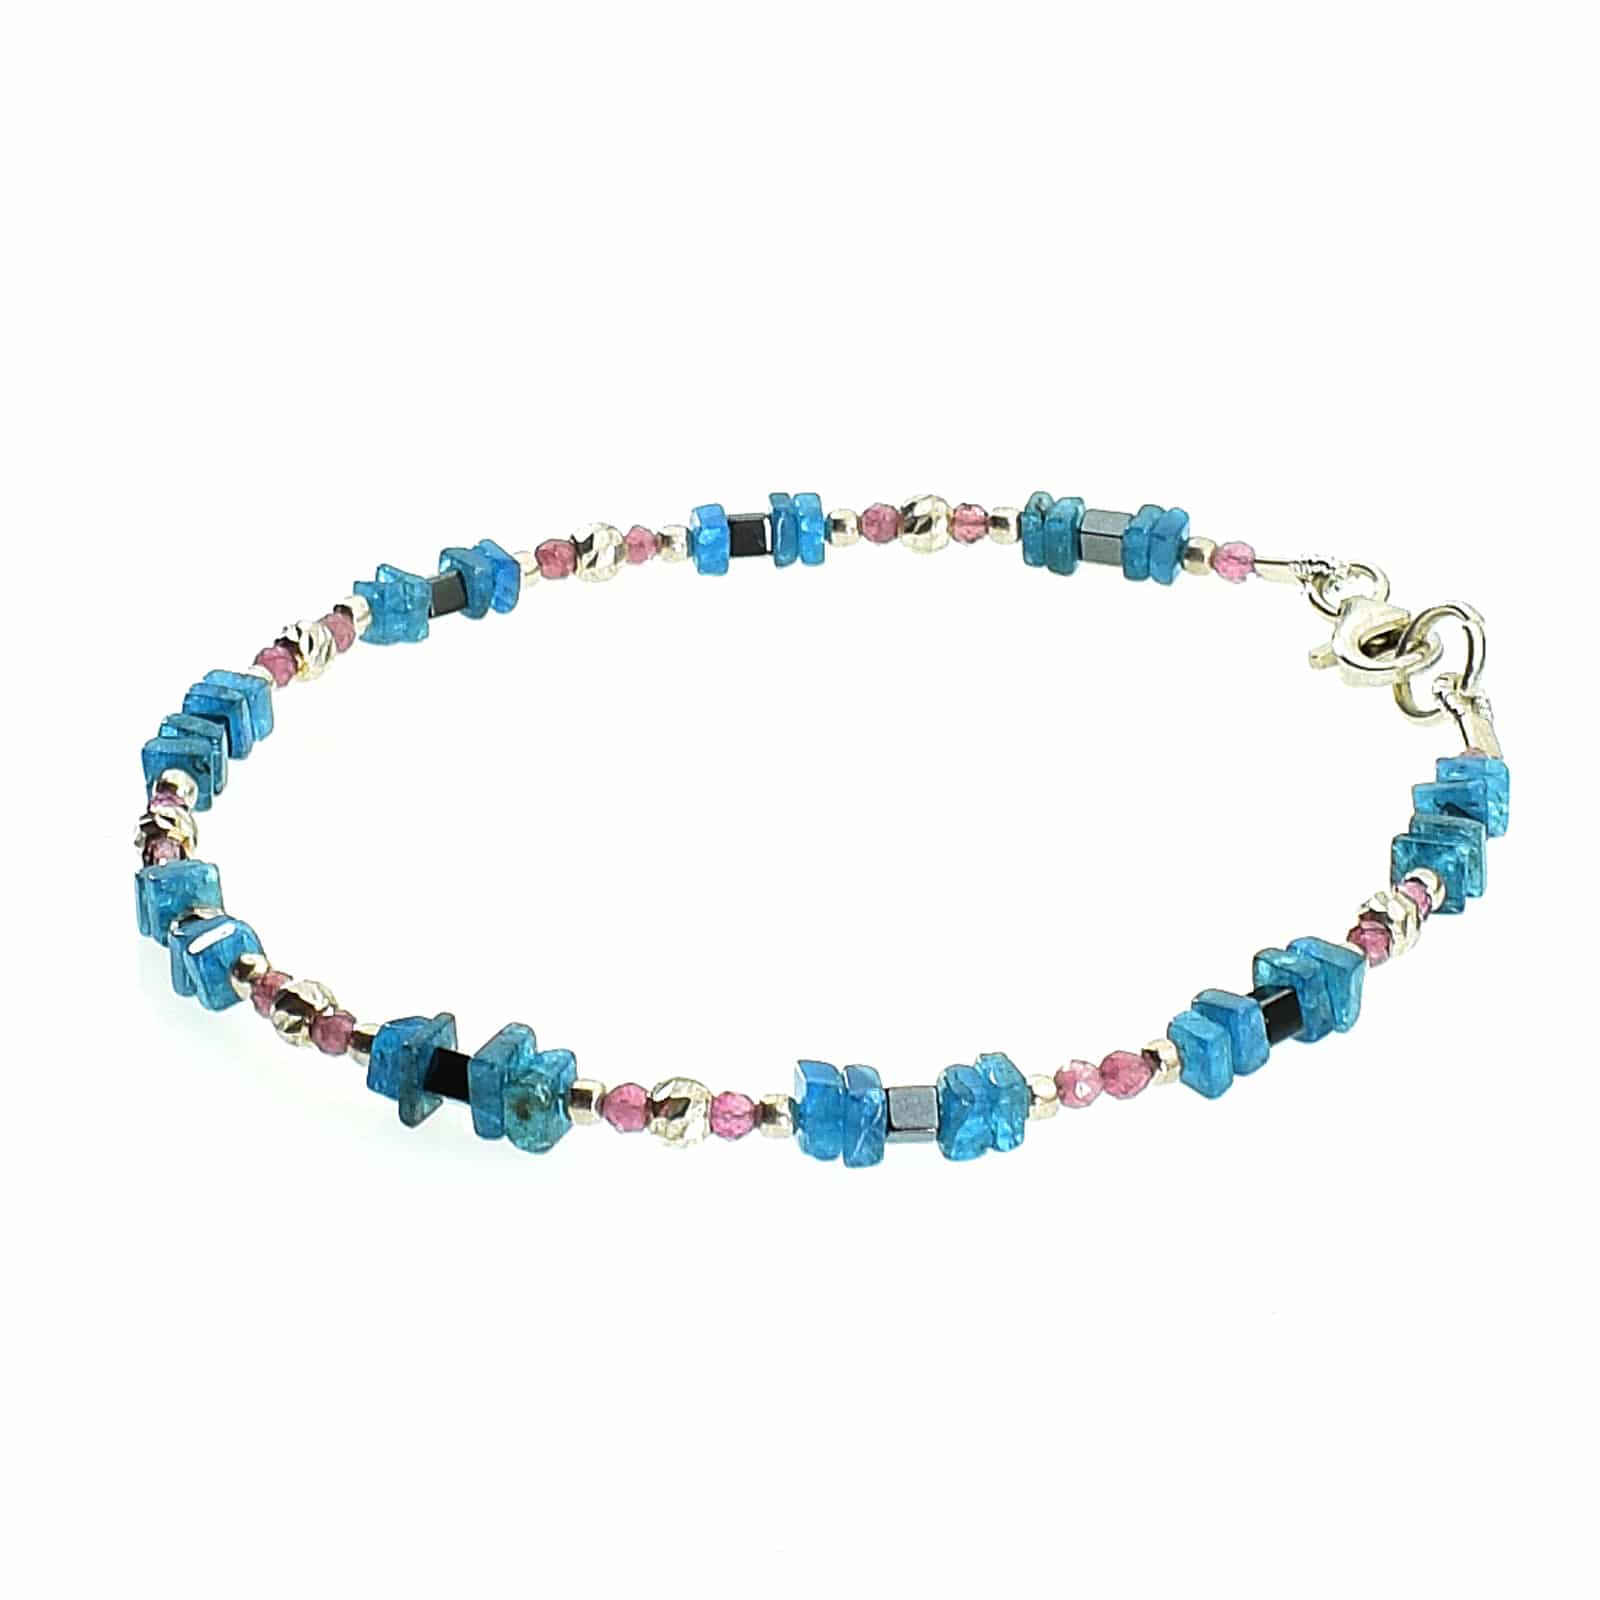 Handmade bracelet made of Hematite, Apatite and pink Tourmaline, decorated with elements made of sterling silver. Buy online shop.